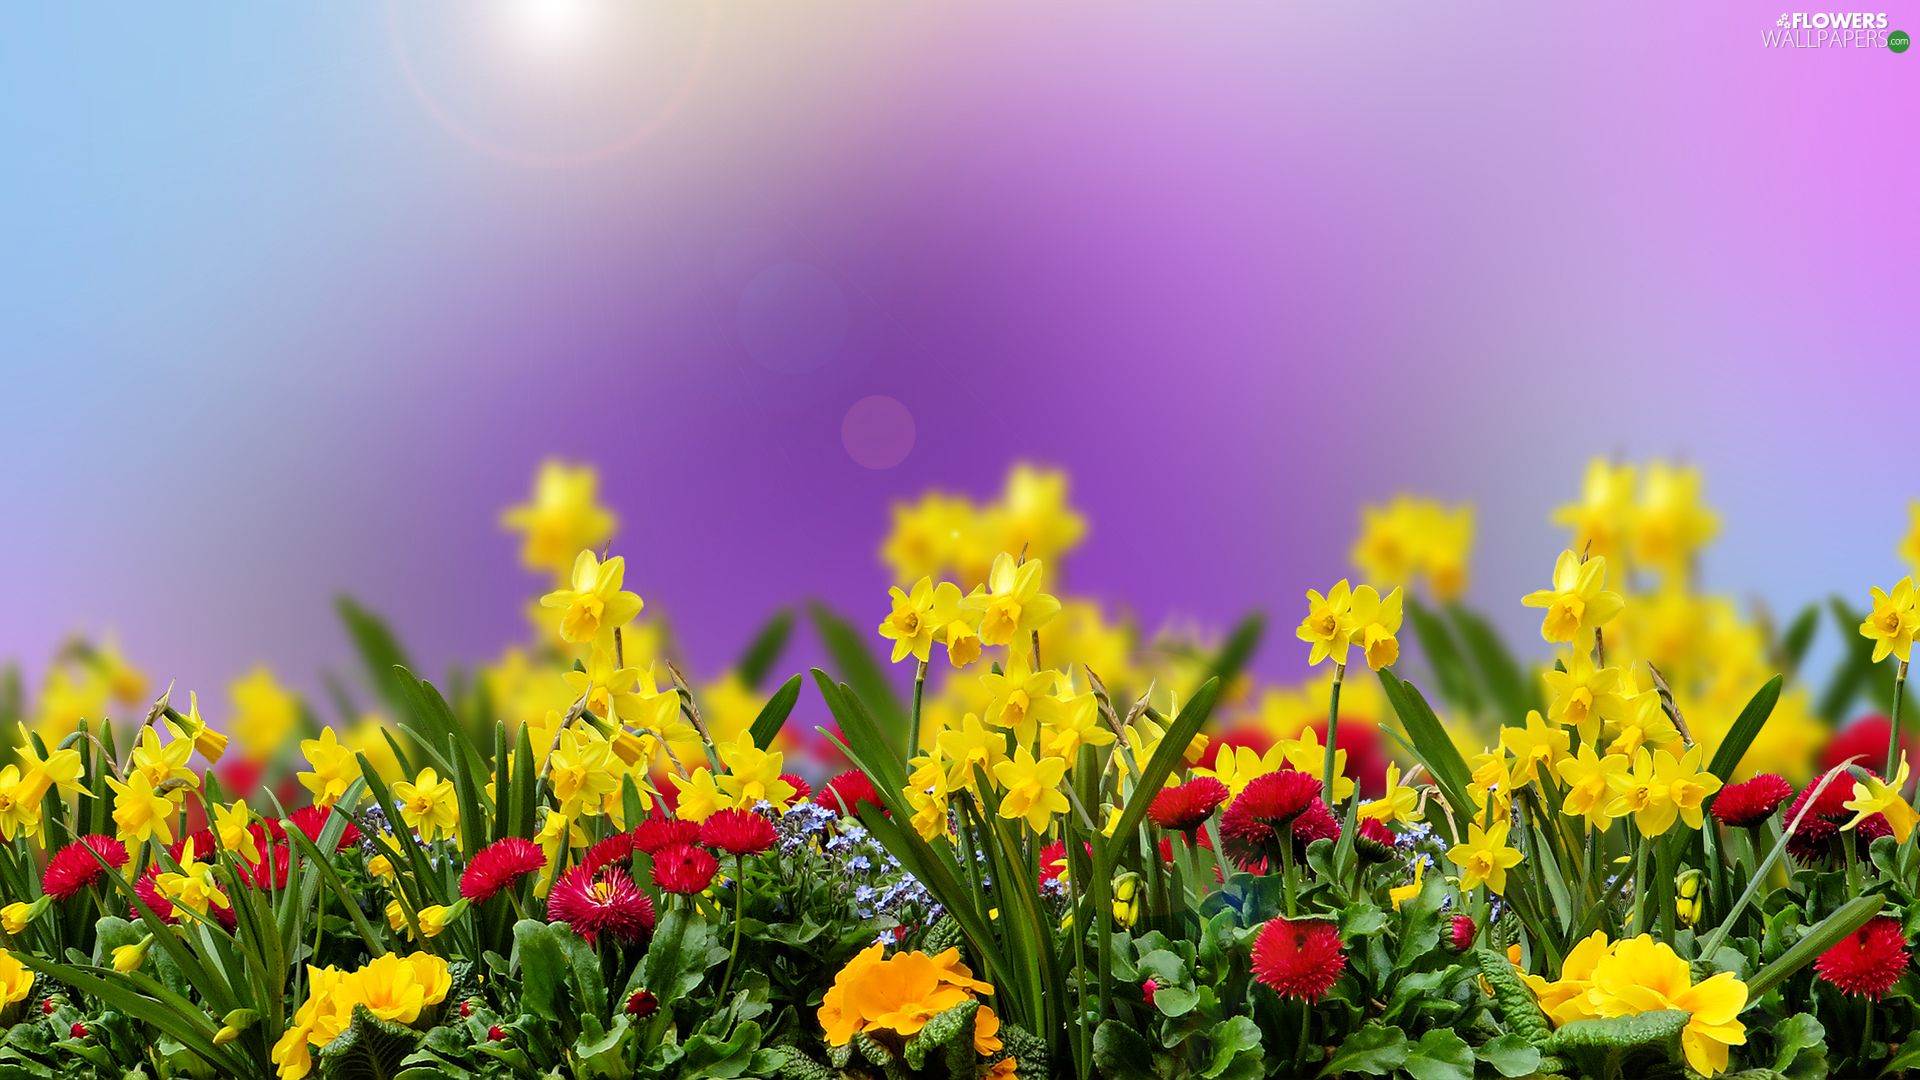 Flowers, daisies, Spring, Daffodils wallpaper: 1920x1080